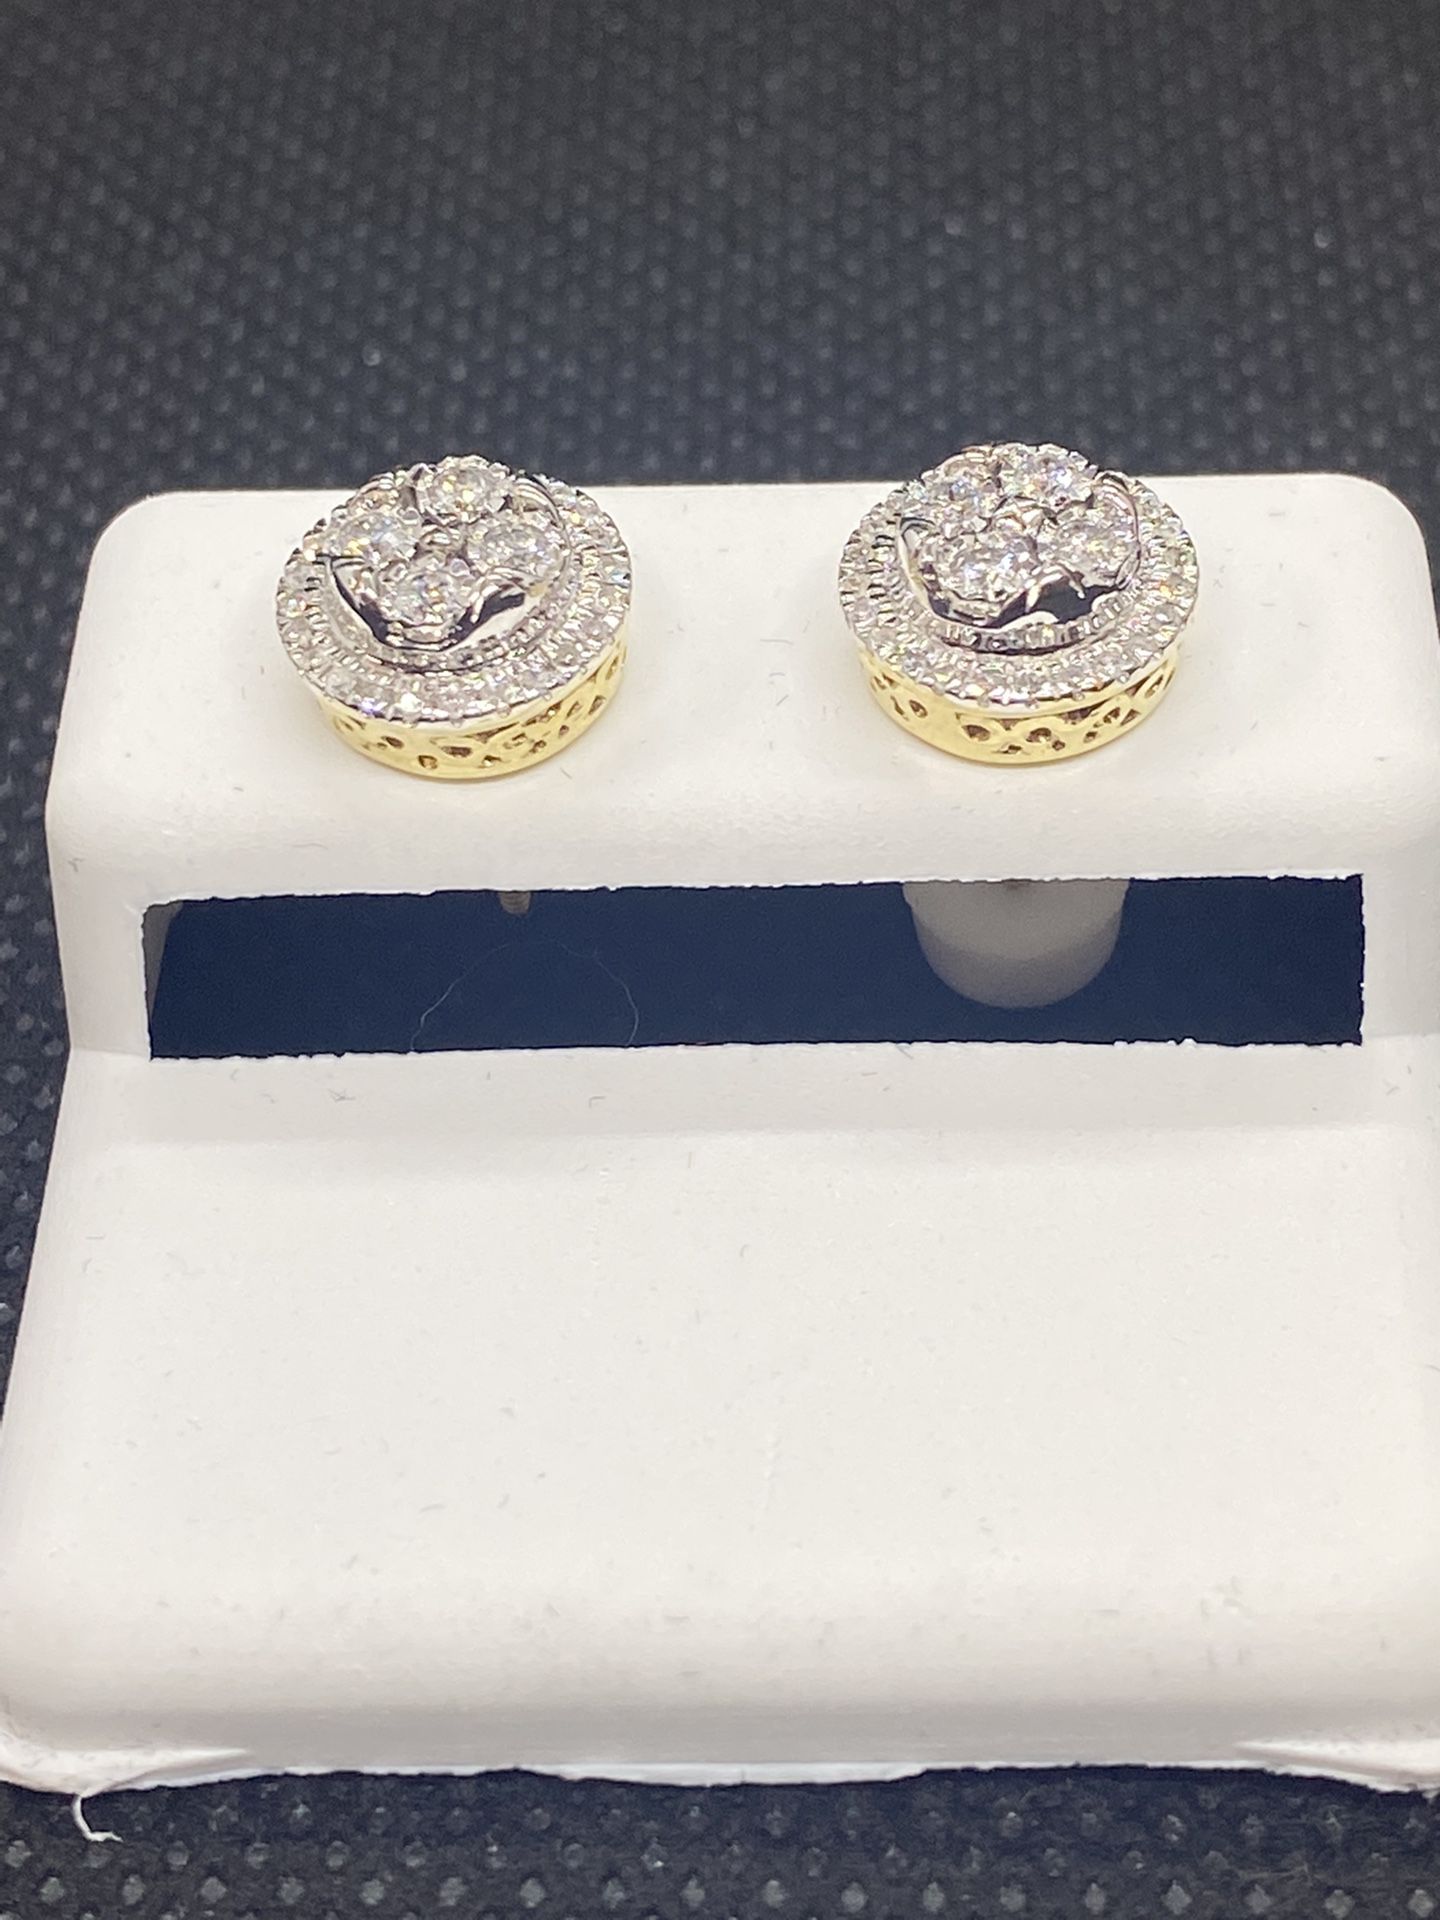 10KT GOLD AND DIAMOND EARRINGS OF 0.35 CTW AVAILABLE ON SPECIAL SALE 